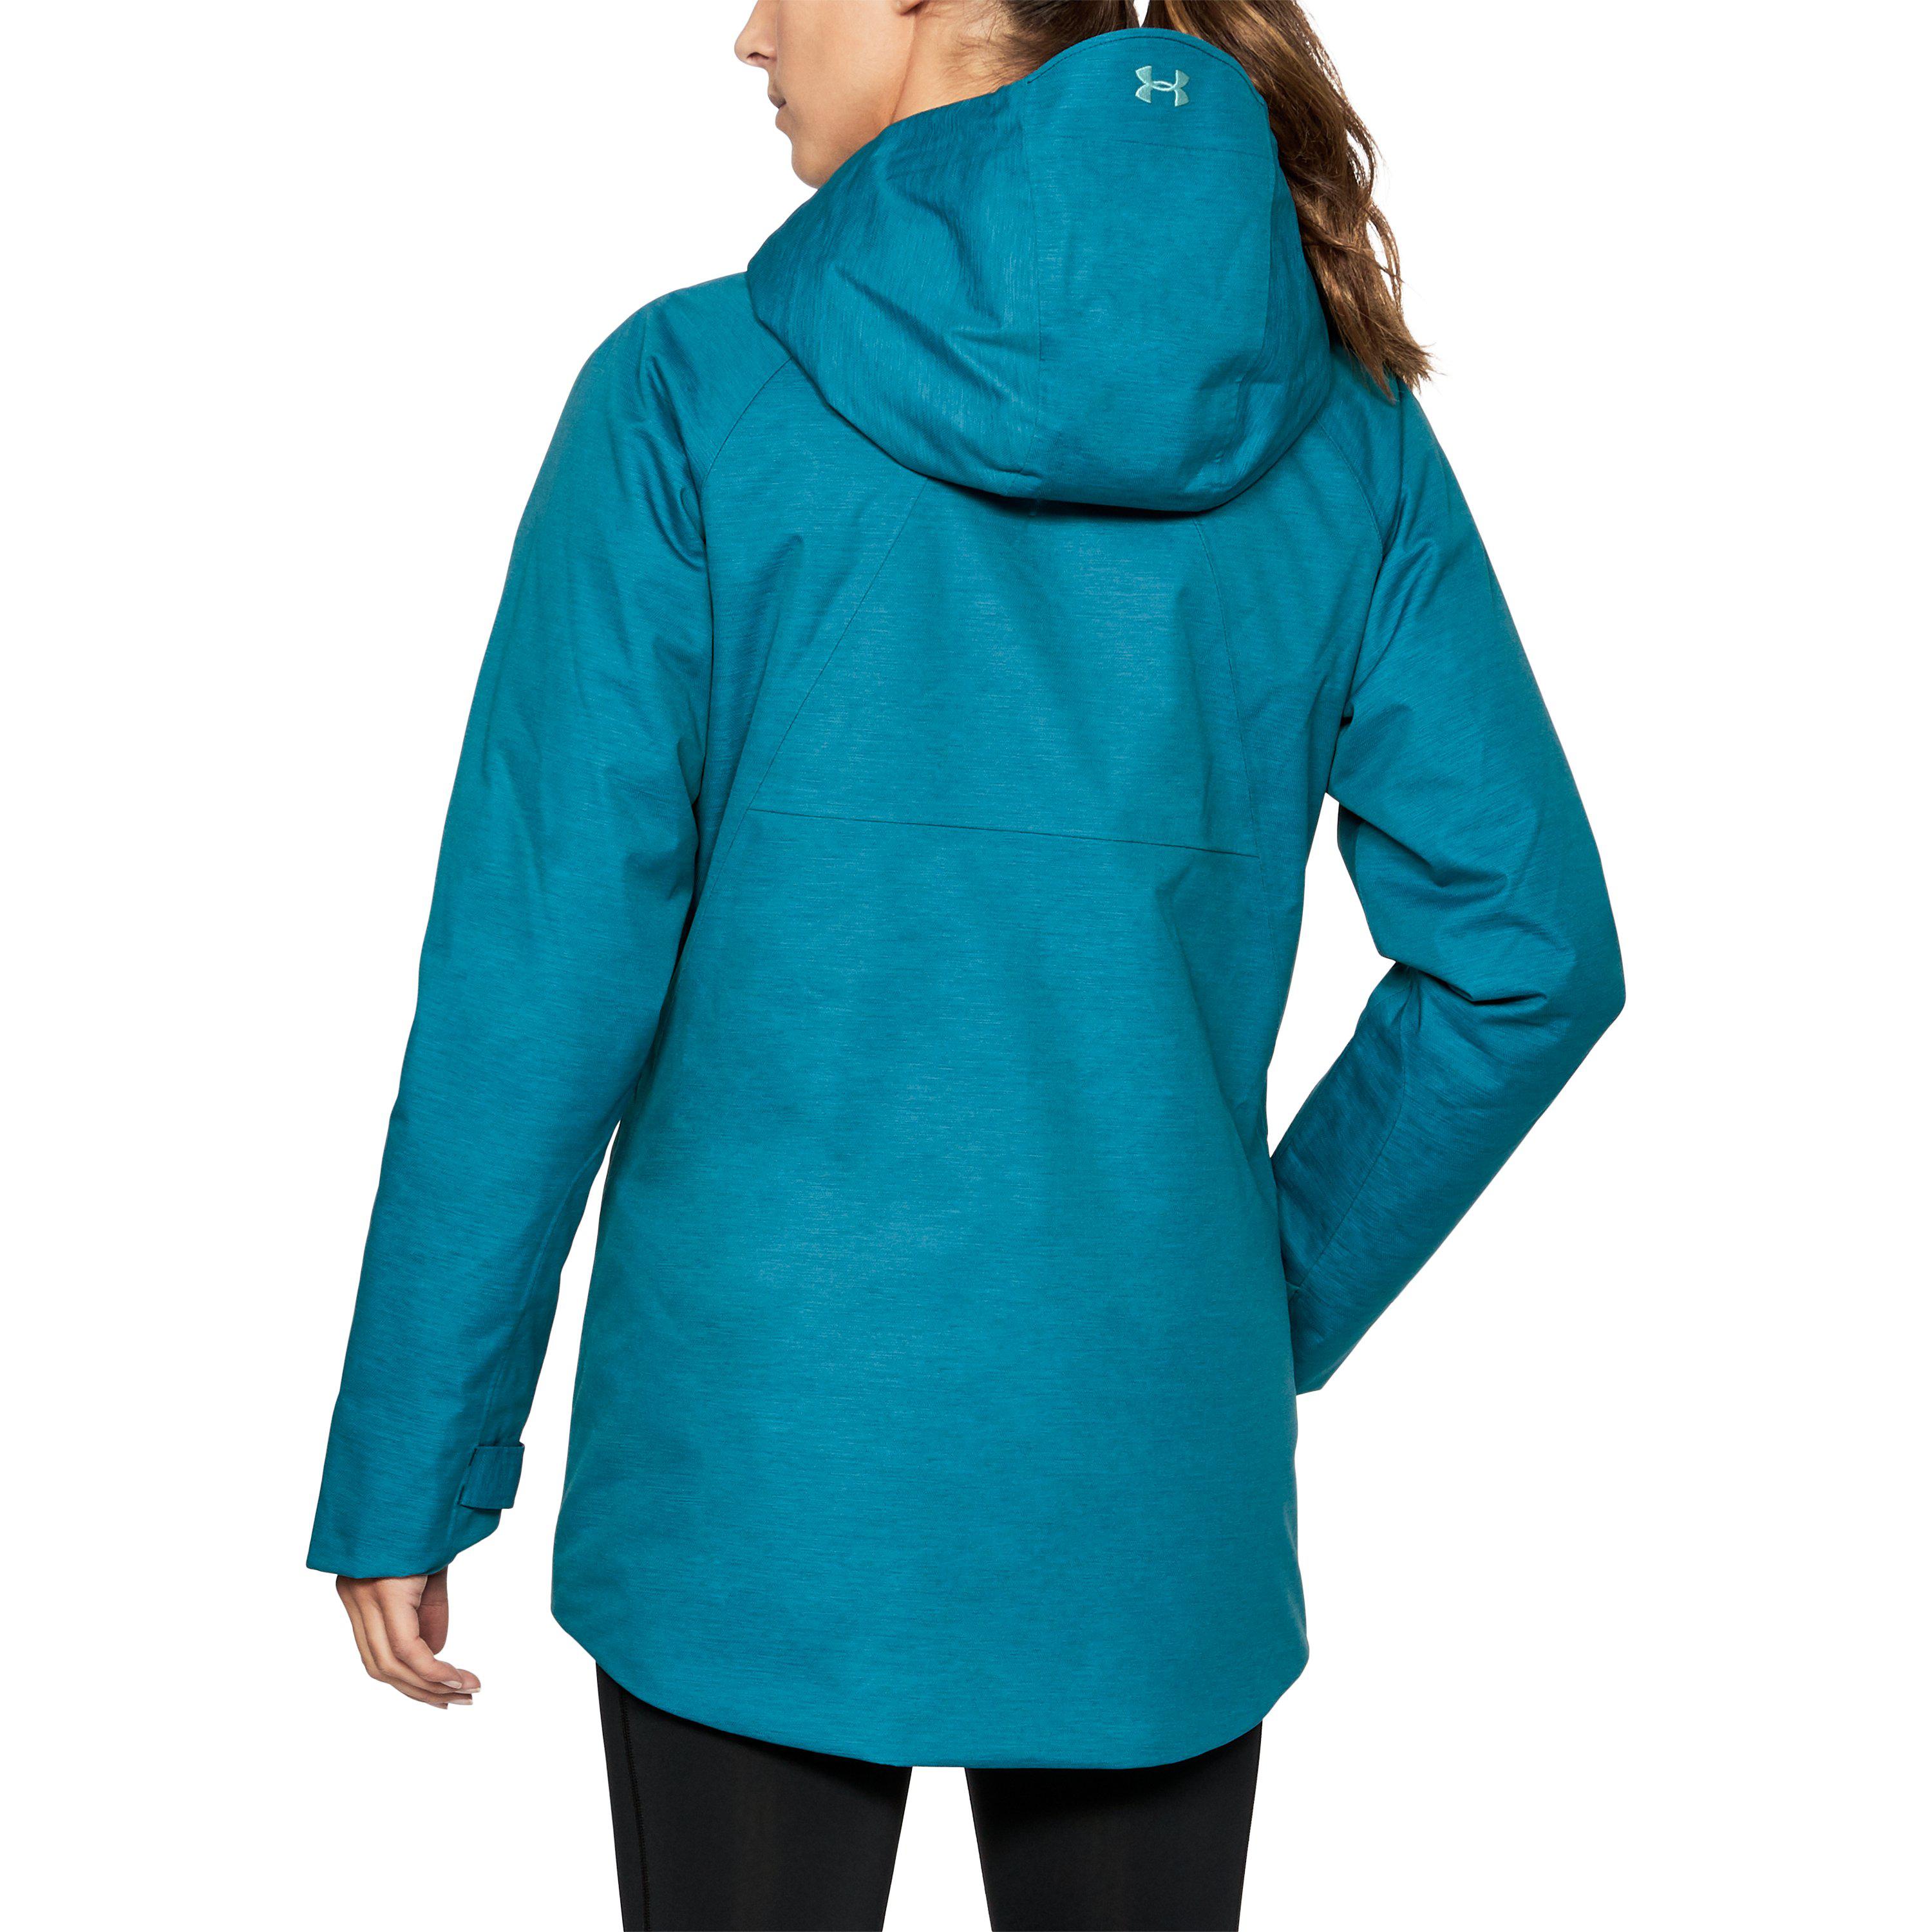 under armour cold gear women's